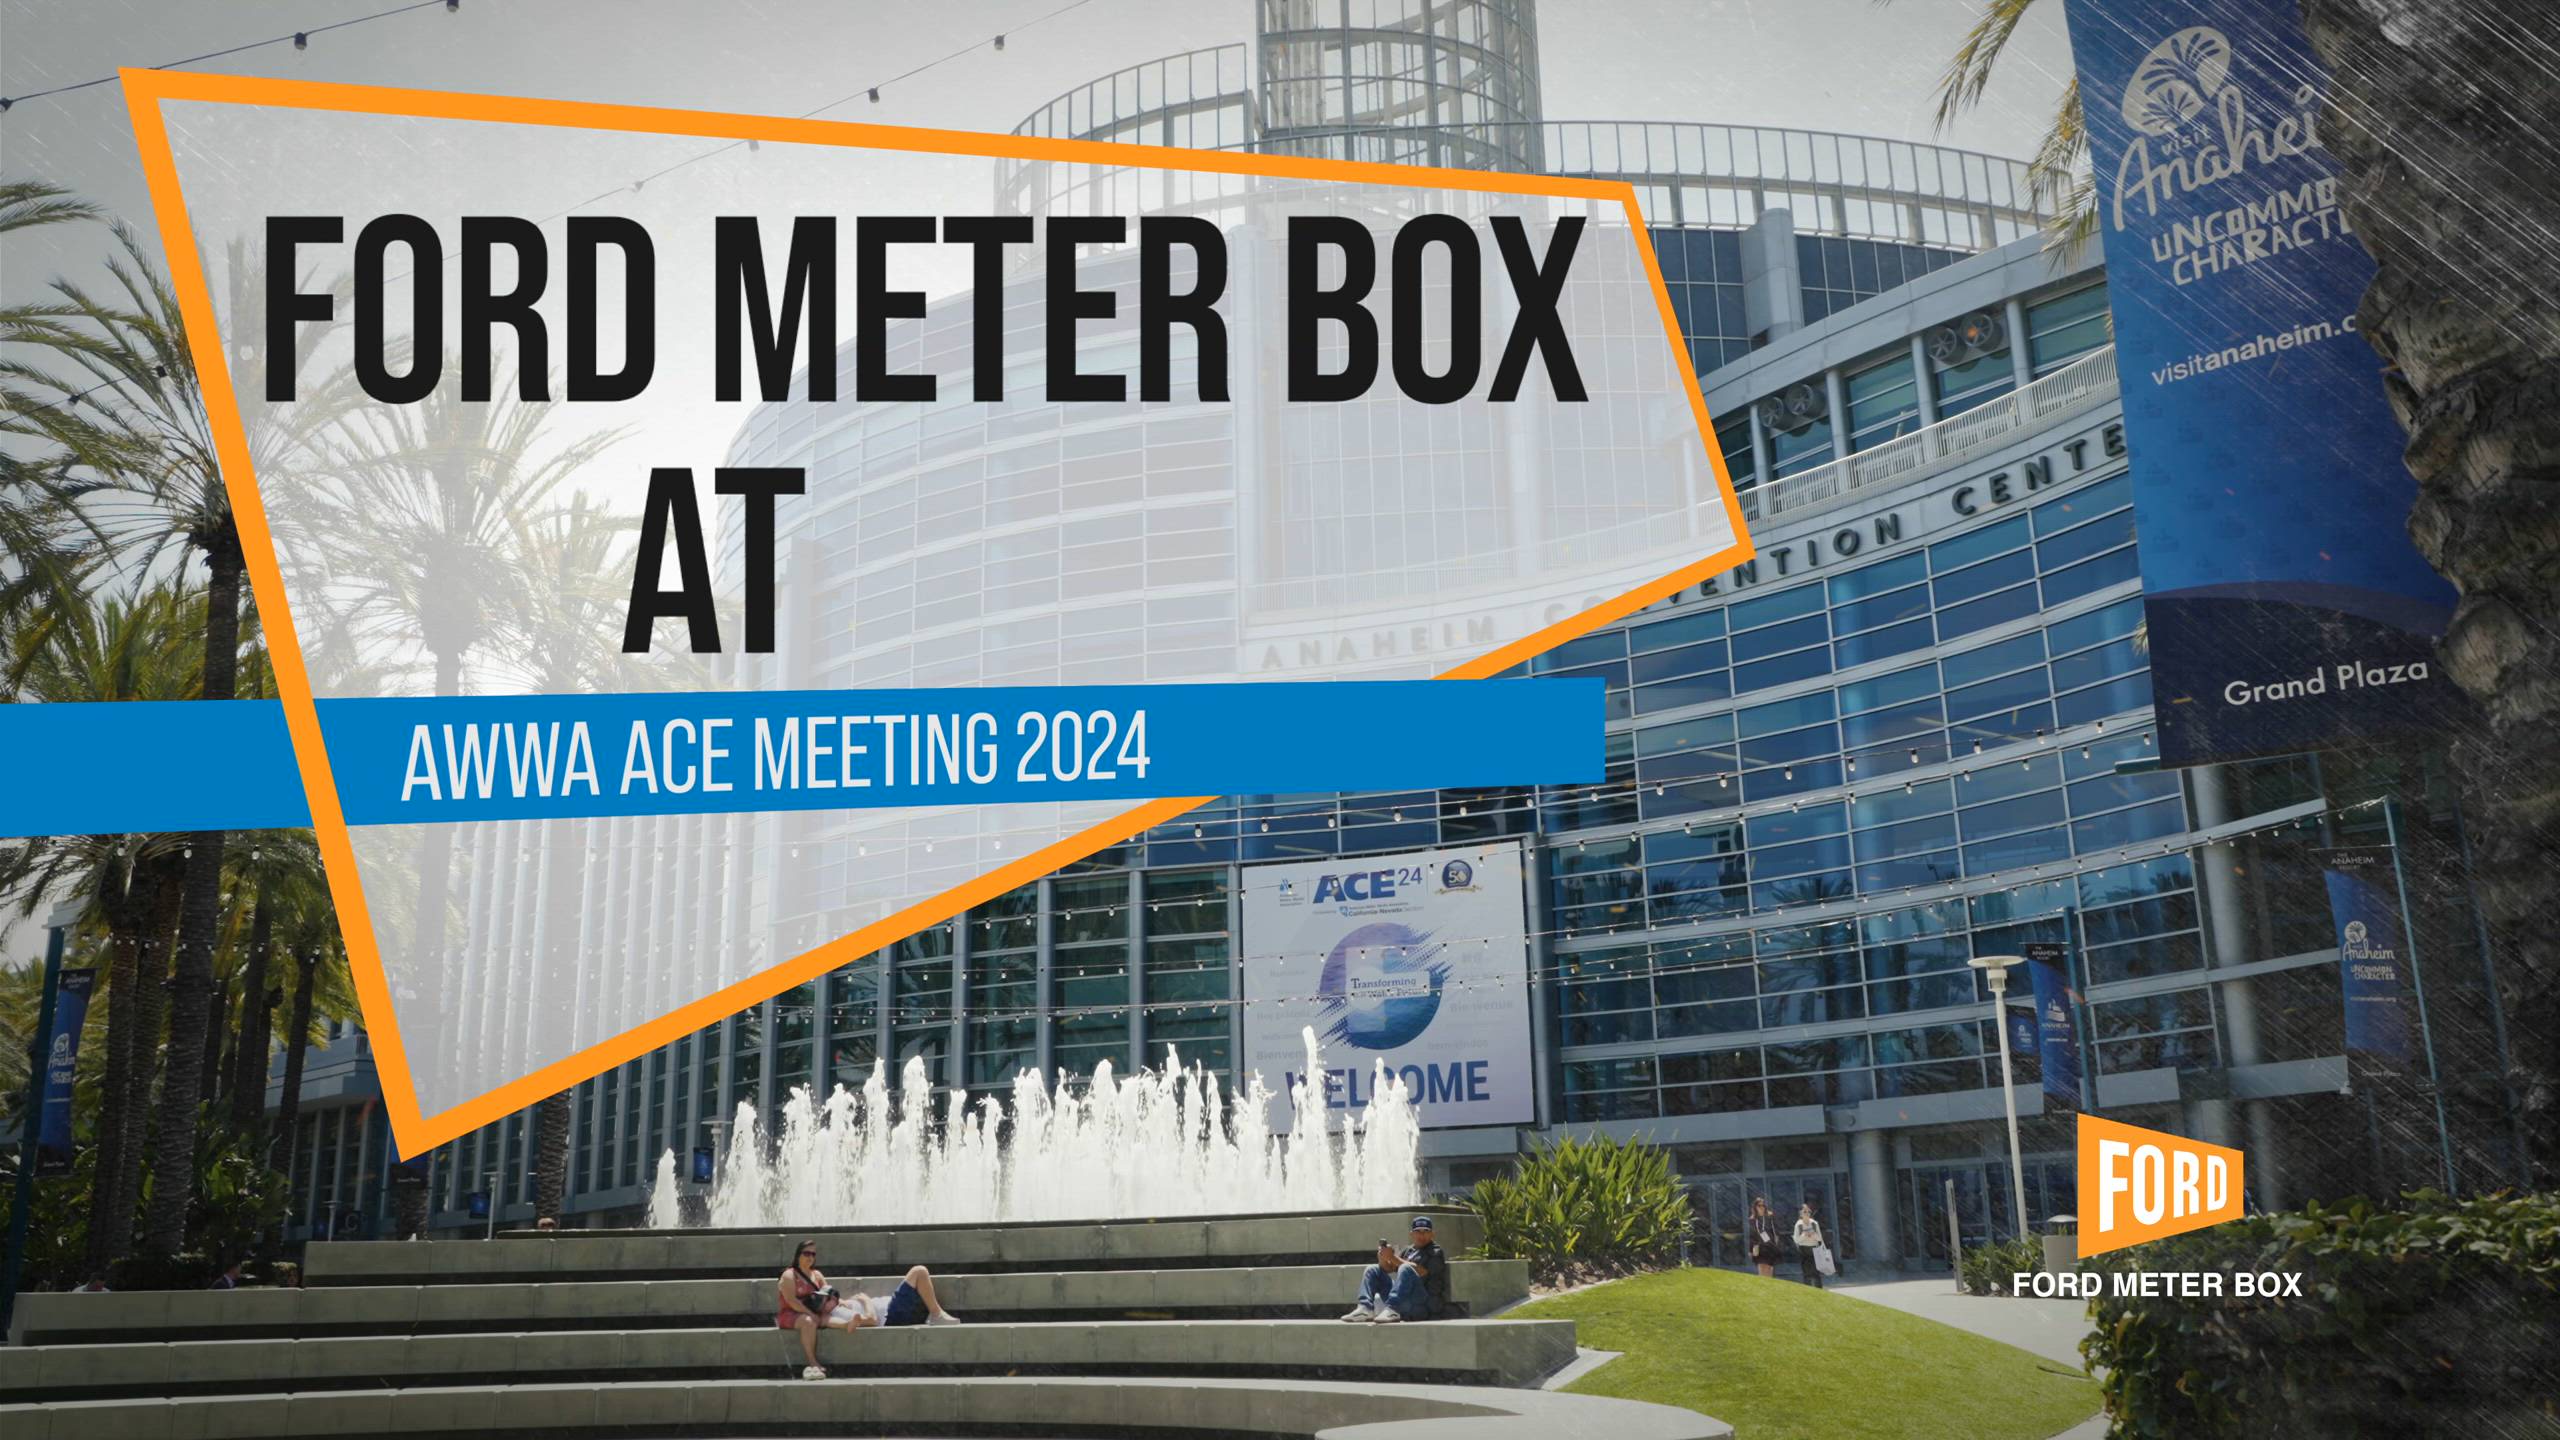 Ford Meter Box at AWWA ACE Meeting 2024 in Anaheim, CA